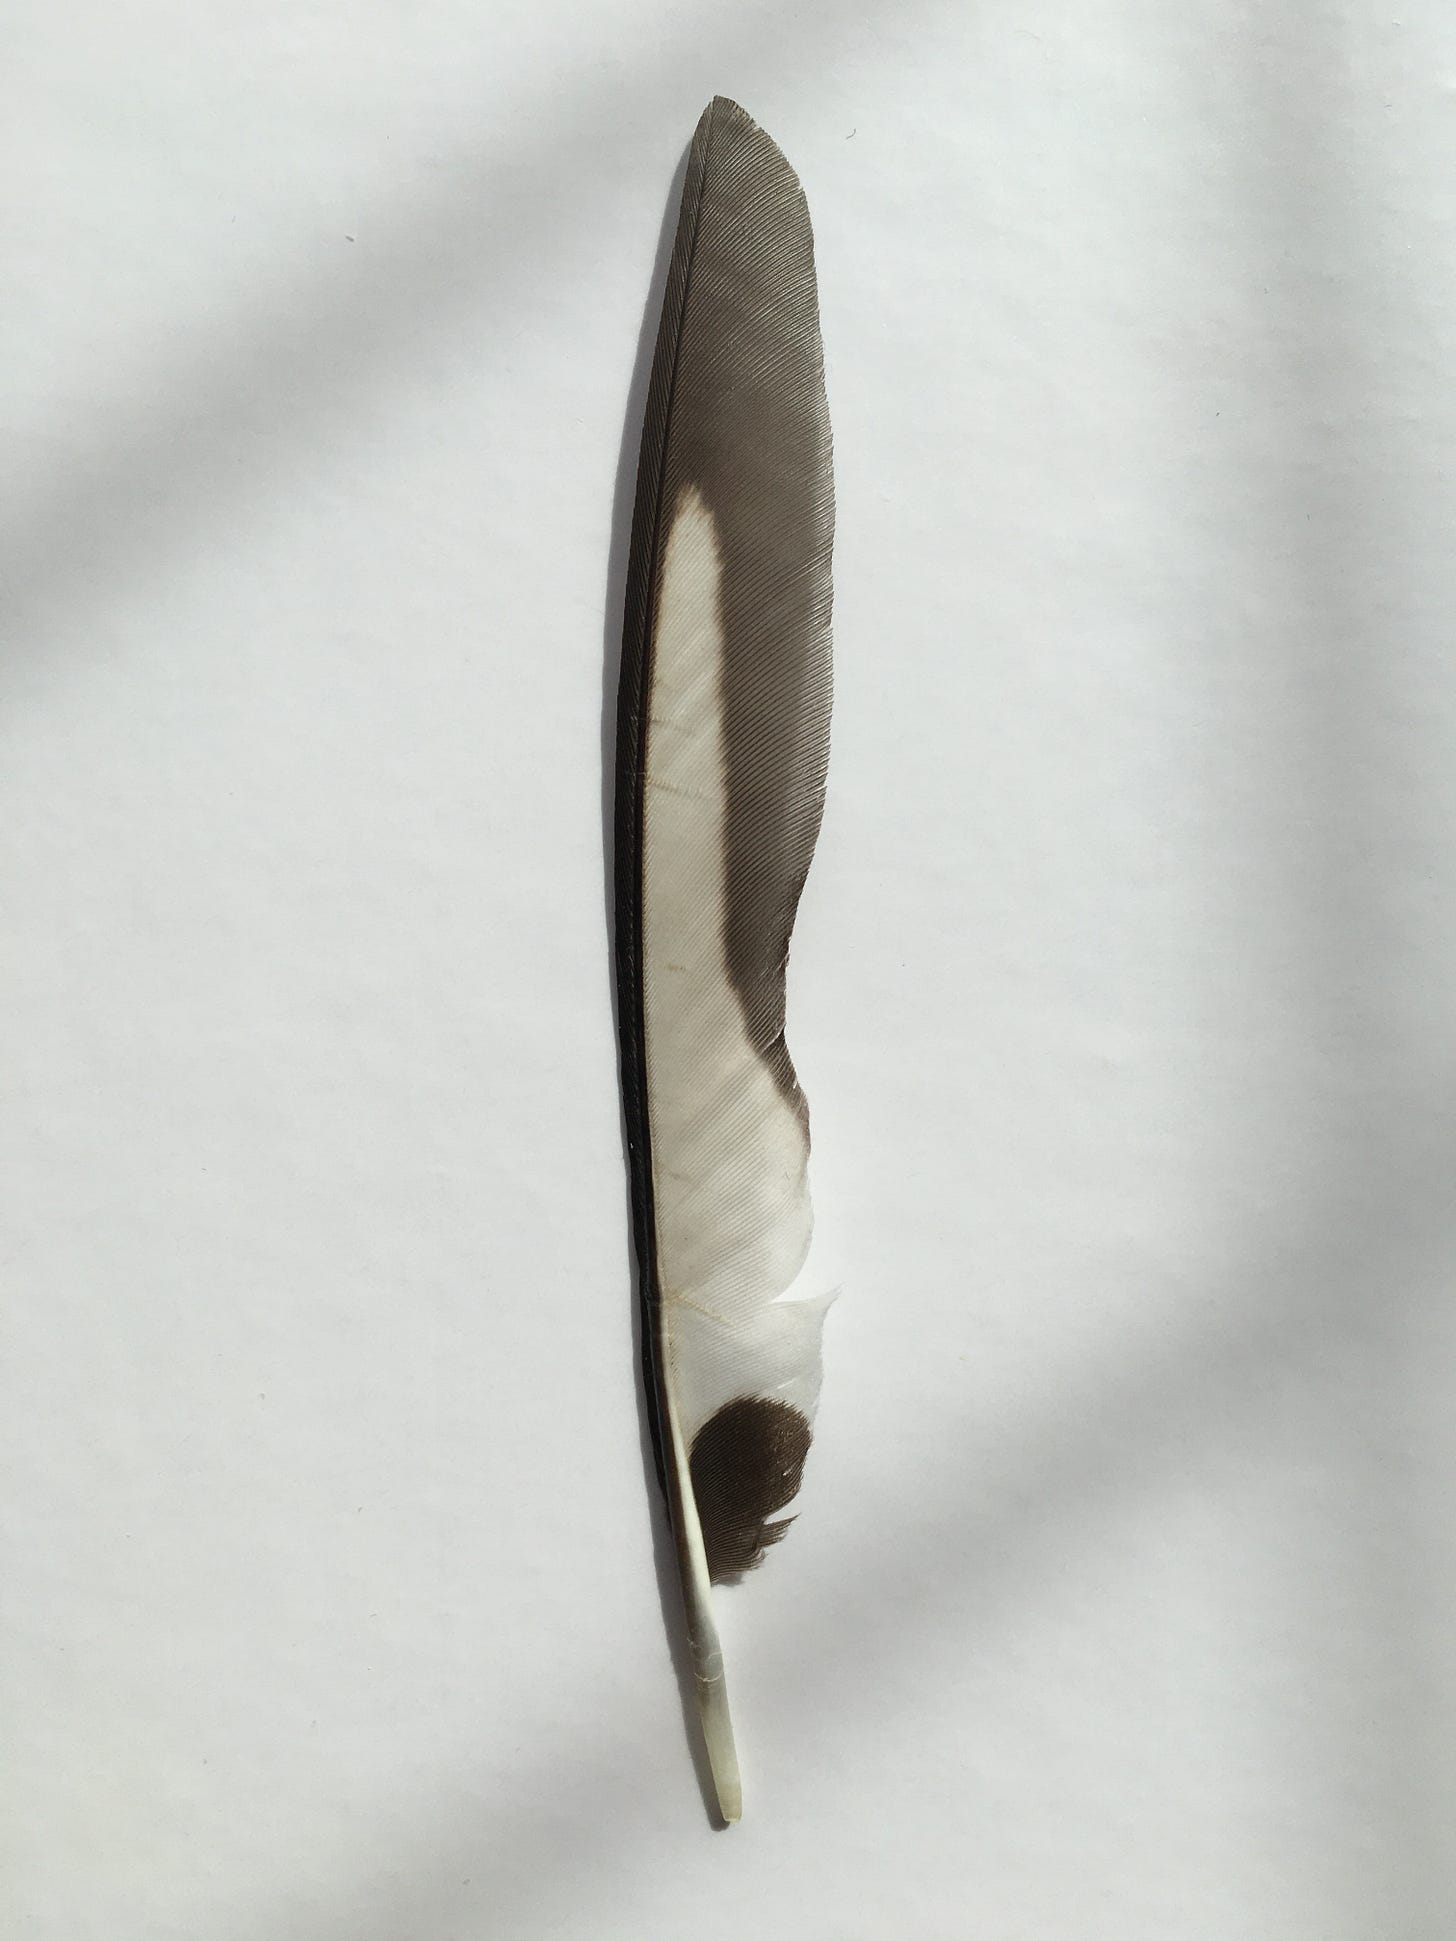 Single black feather with large white area in middle